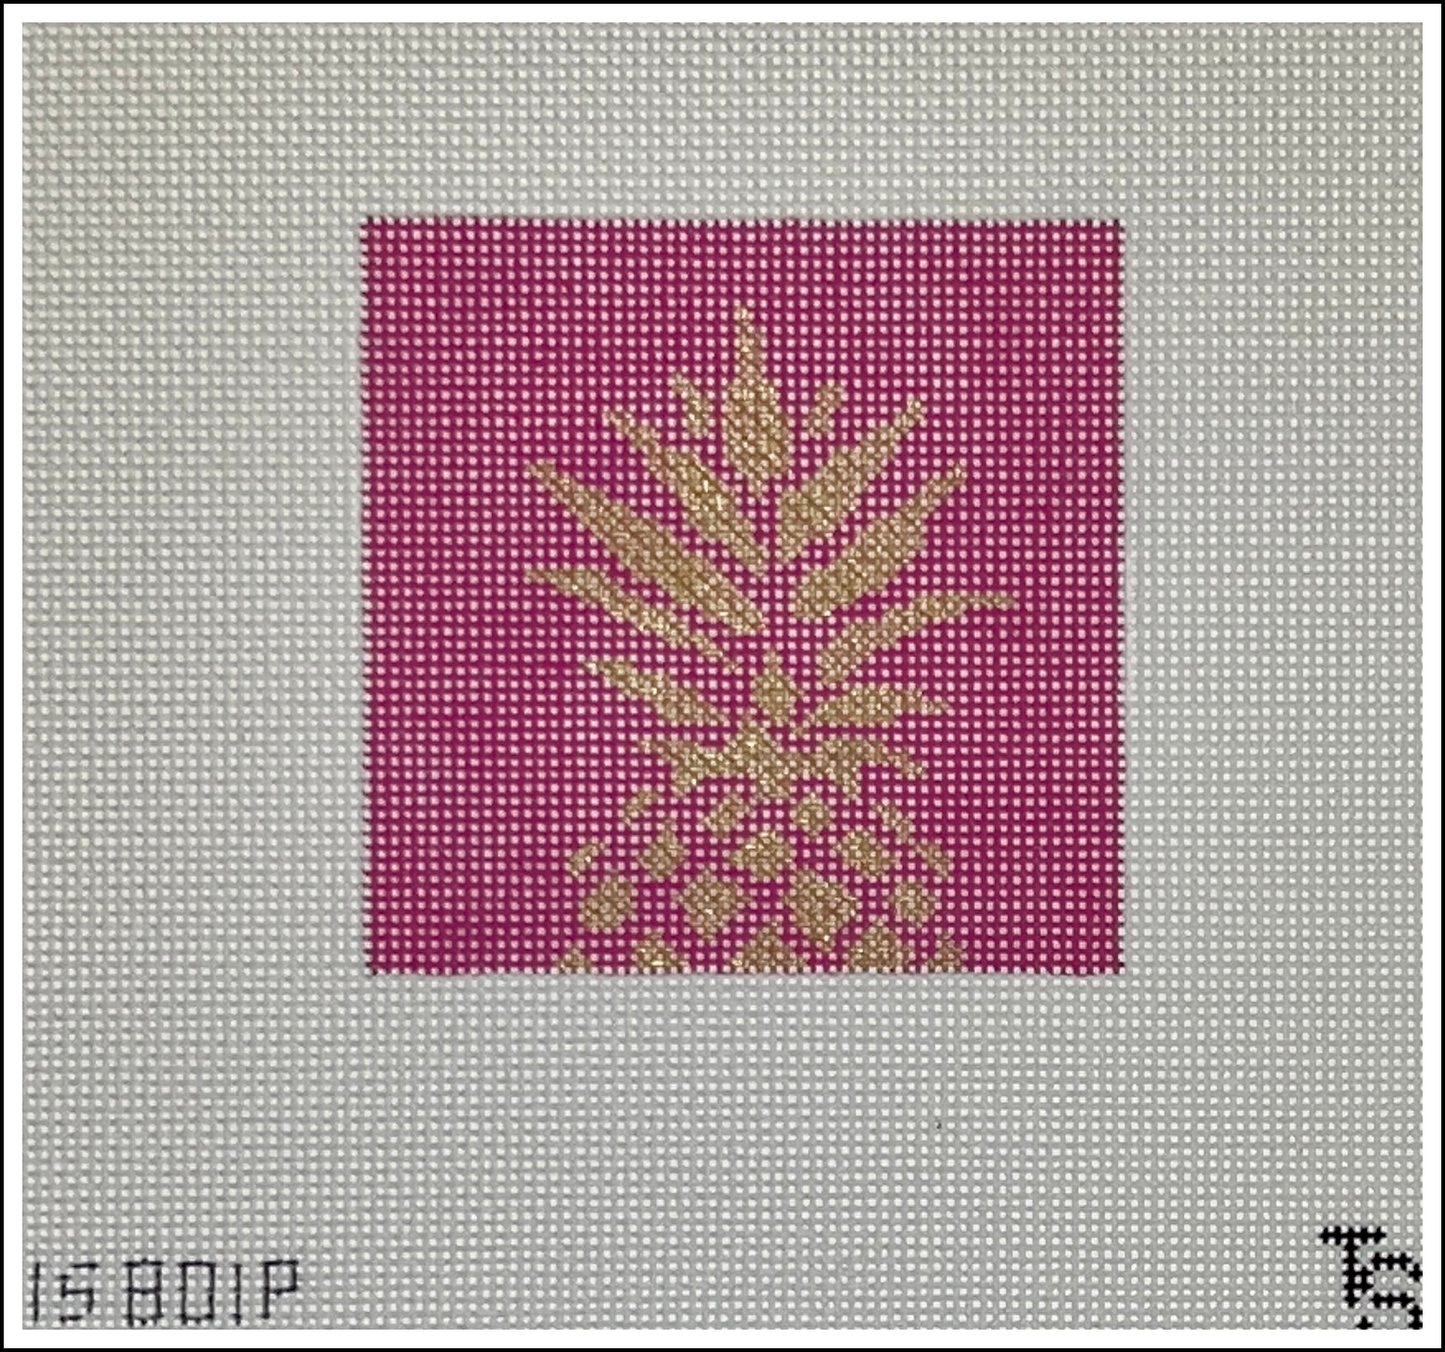 Two Sisters Pineapple on Pink Insert